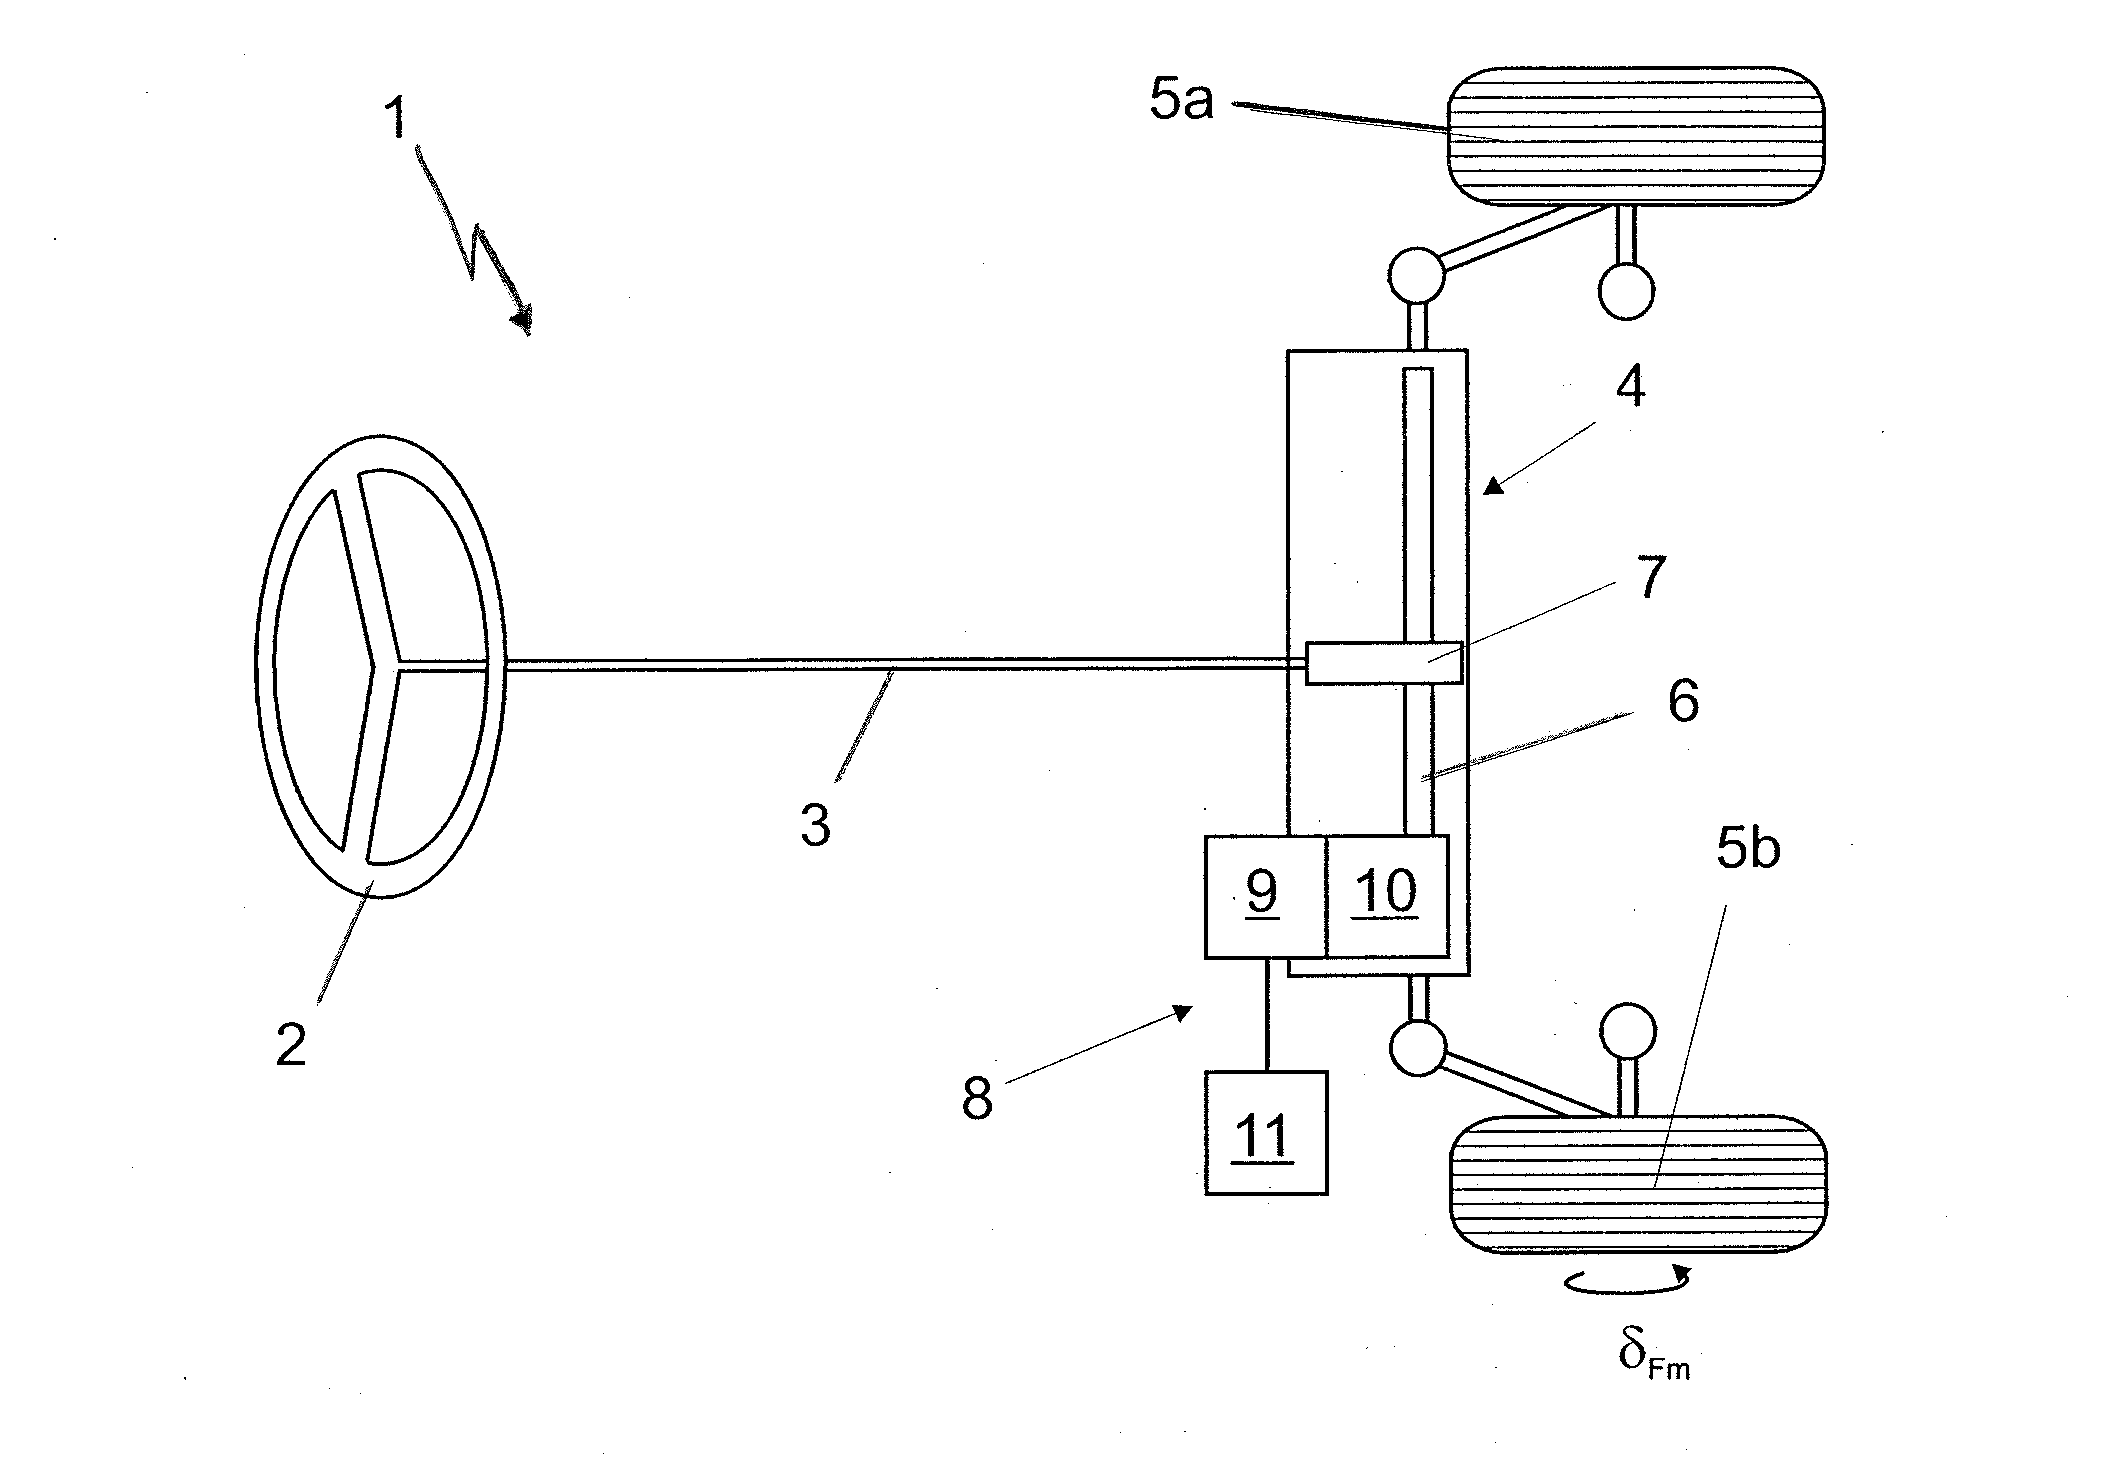 Method for operating an electric motor